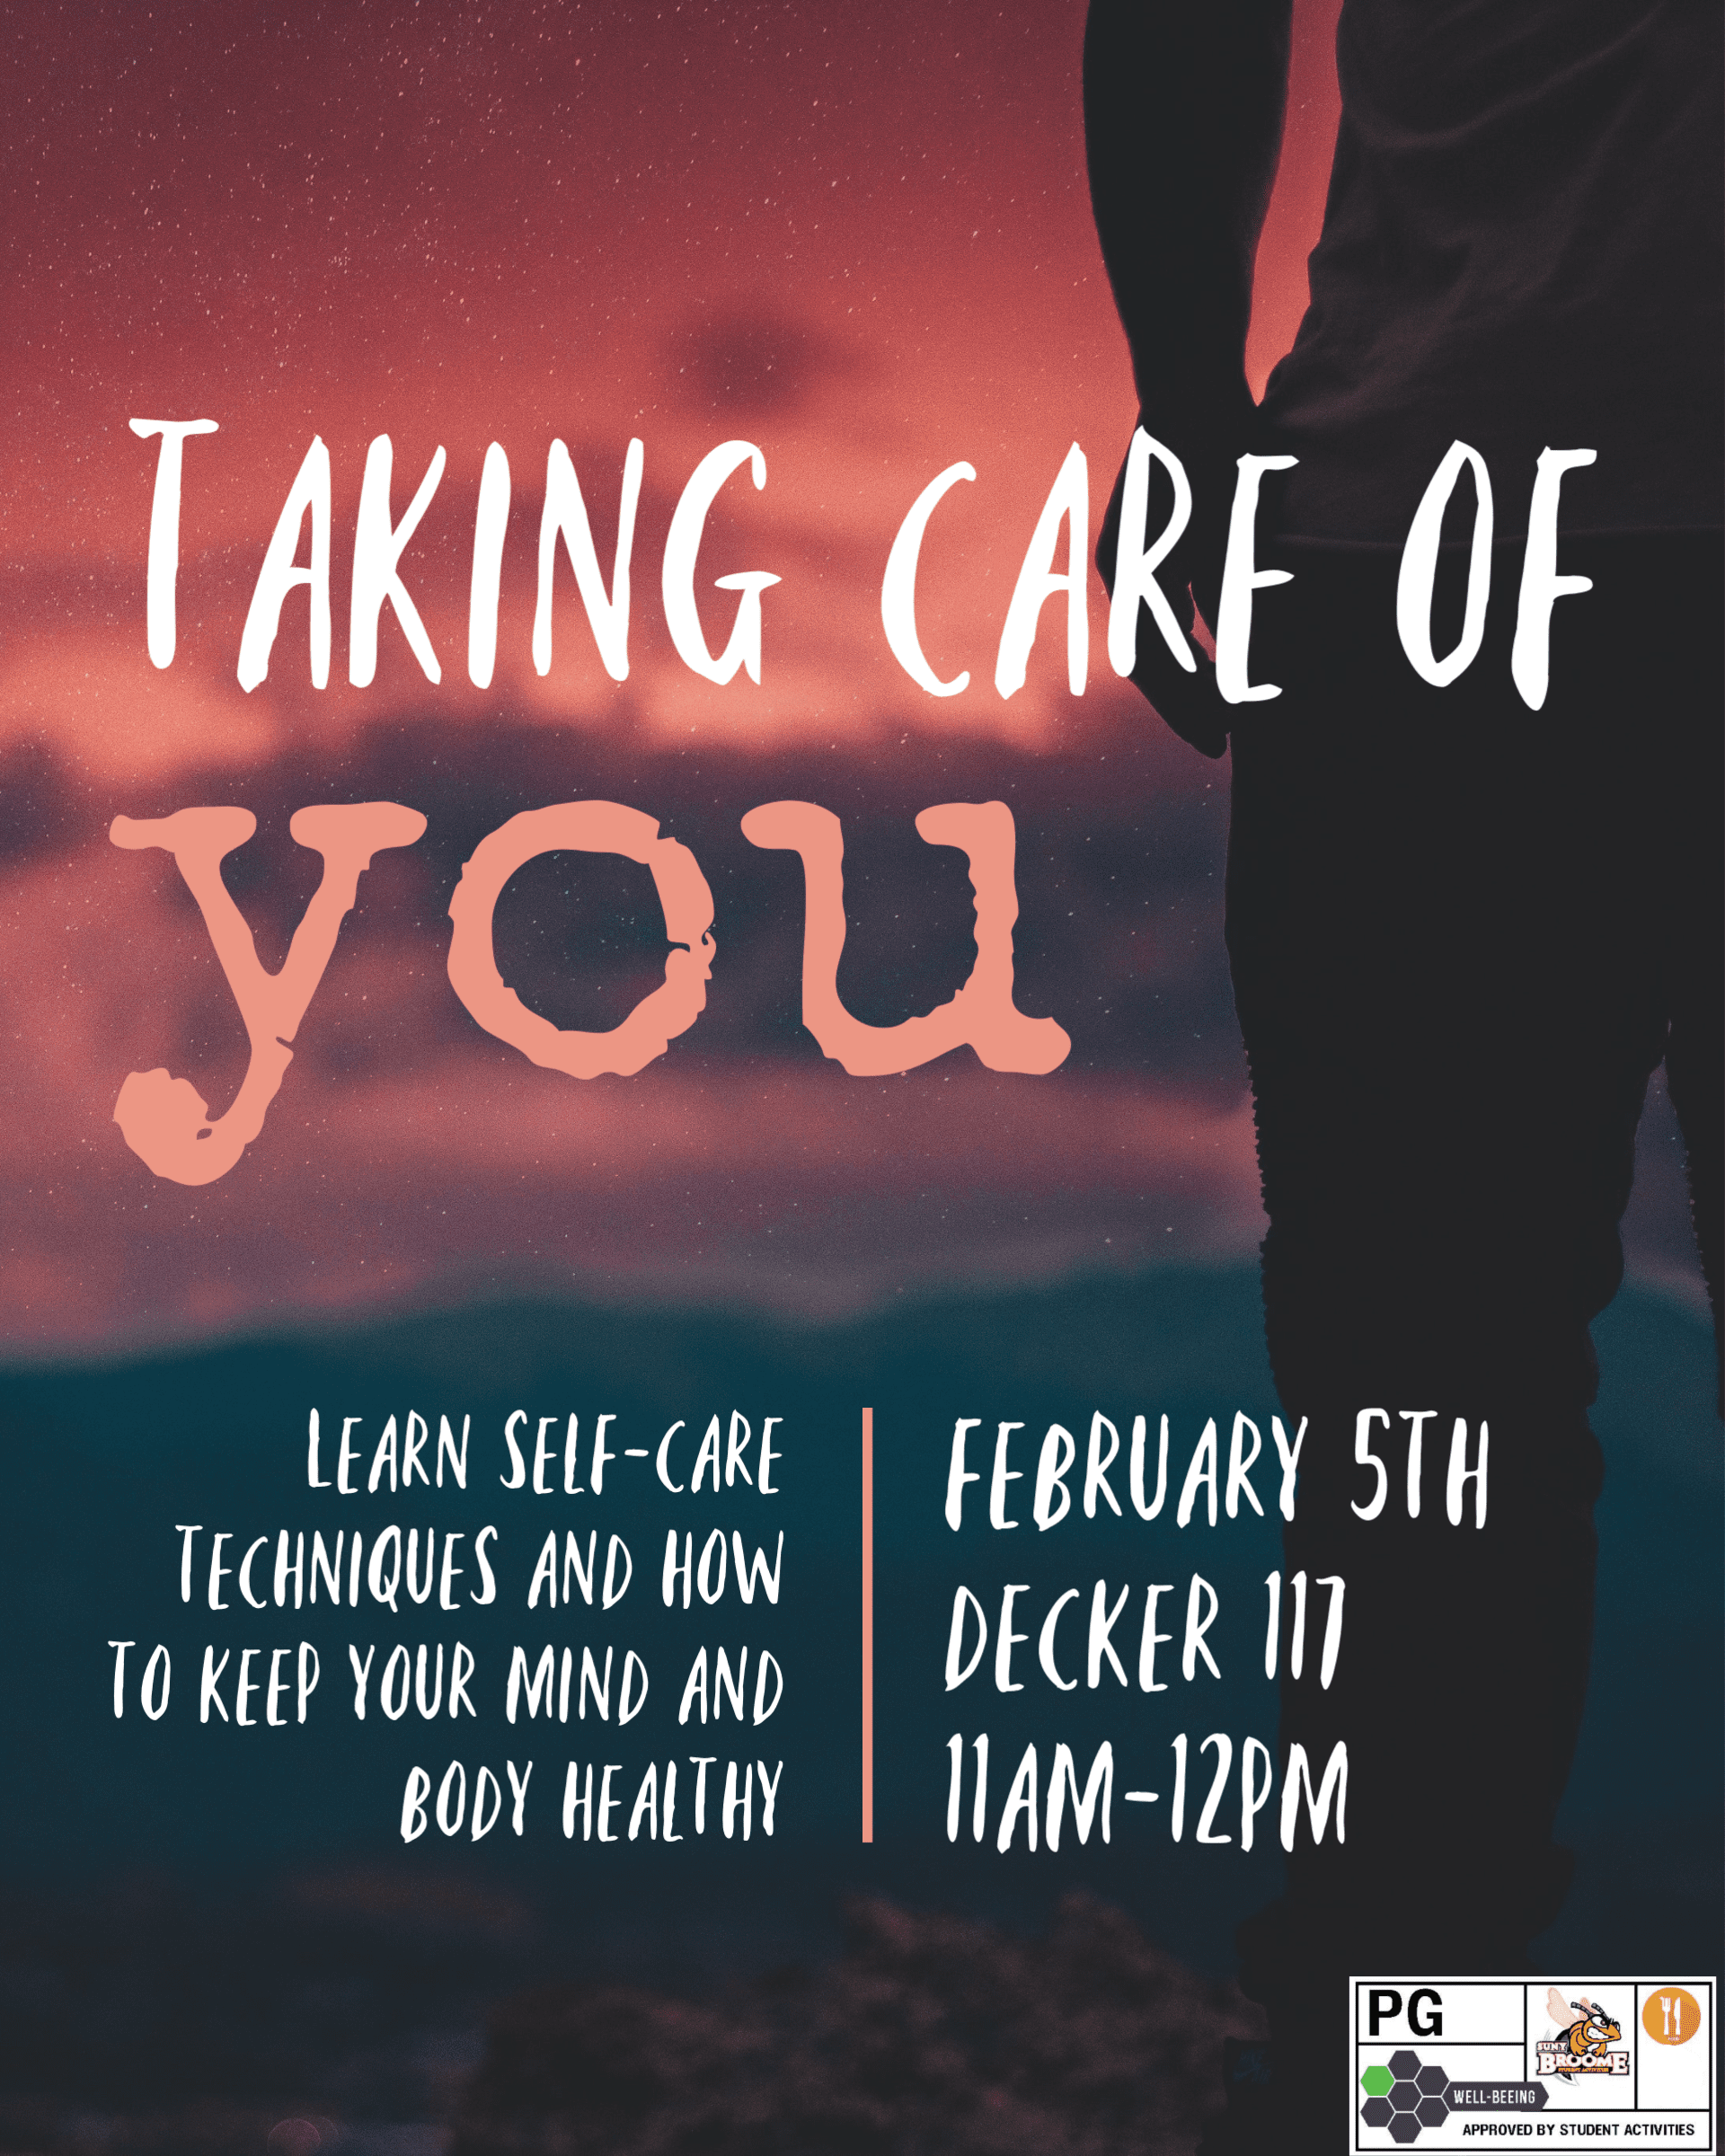 Learn how to take care of you on Feb. 5